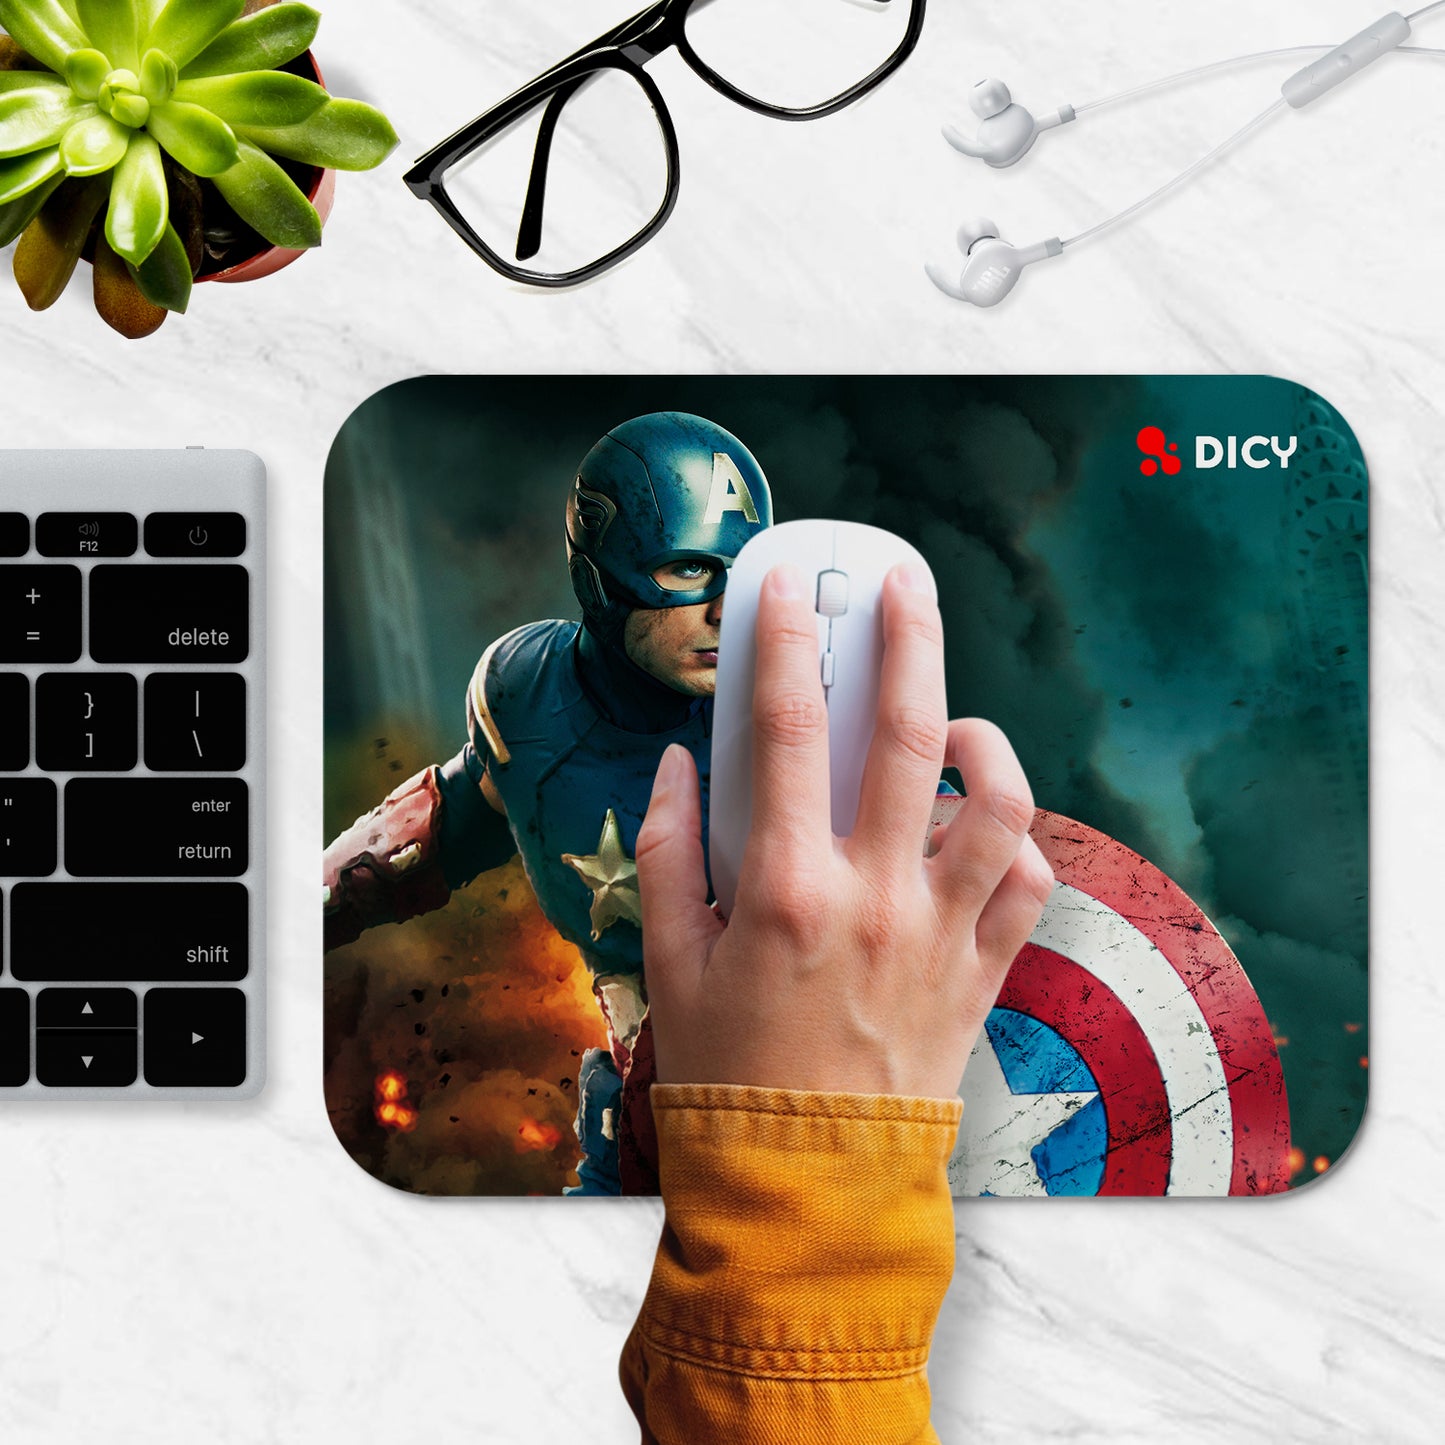 Mouse pad for Office Laptop/PC | Captain America